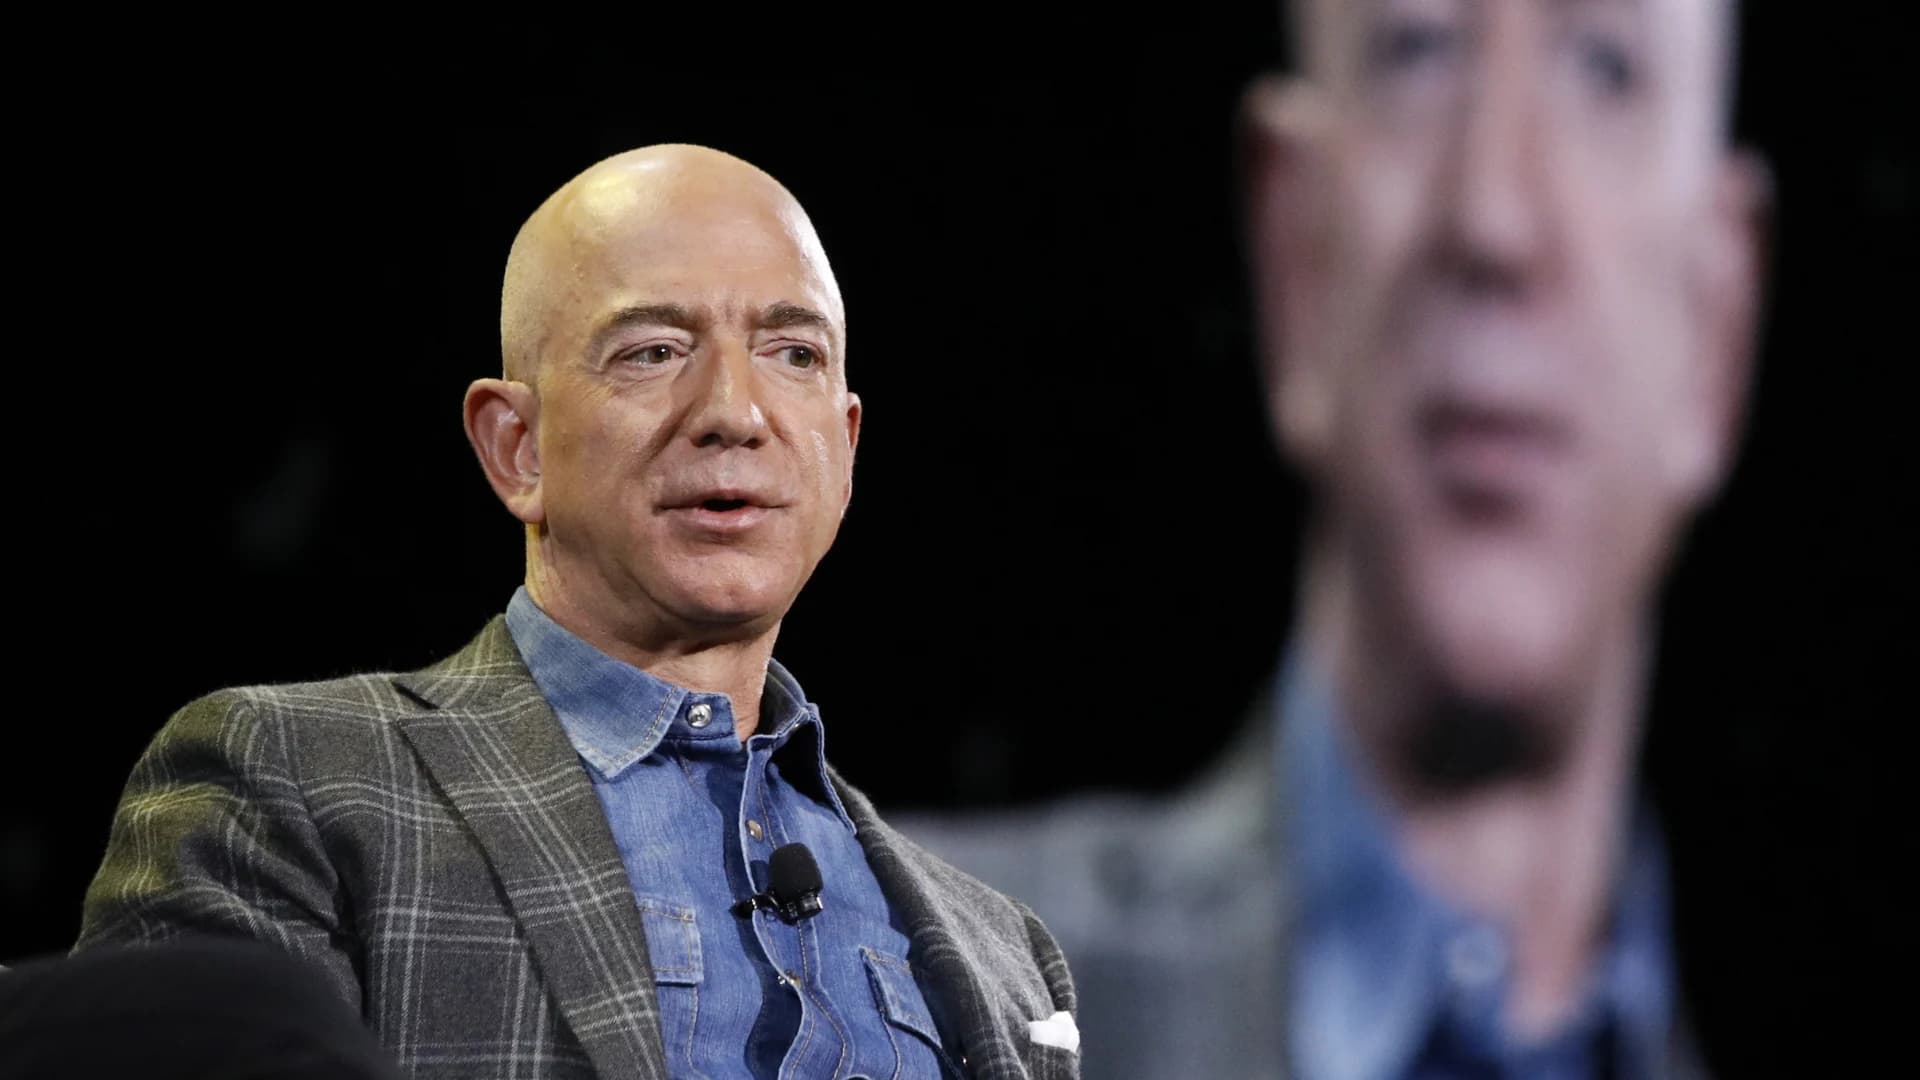 Jeff Bezos is worth $177B, Forbes says. Here the list of the richest people on the planet